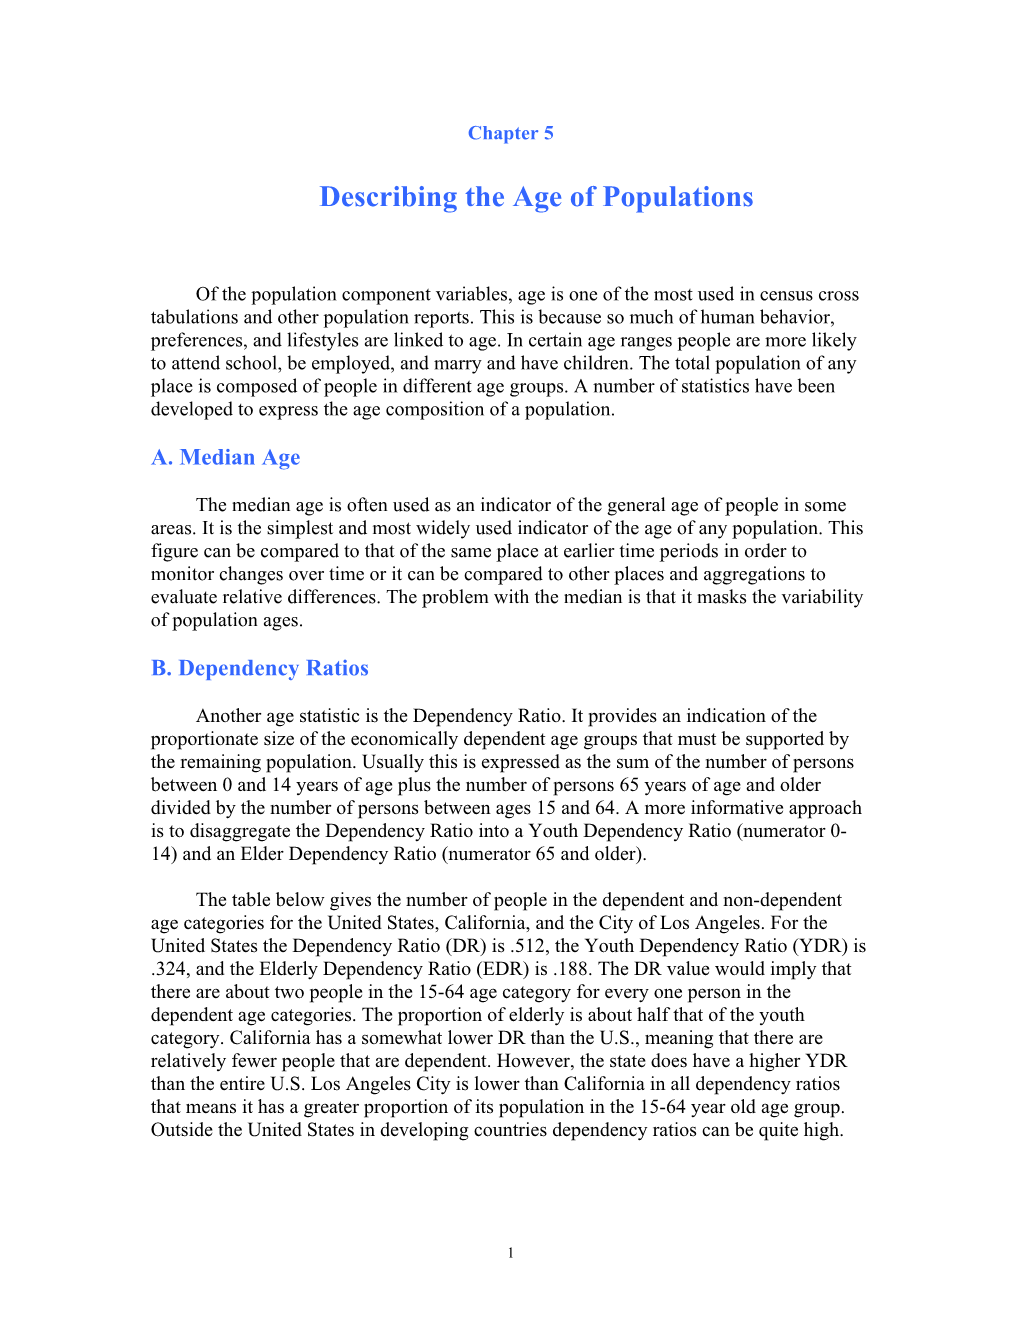 Describing the Age of Populations